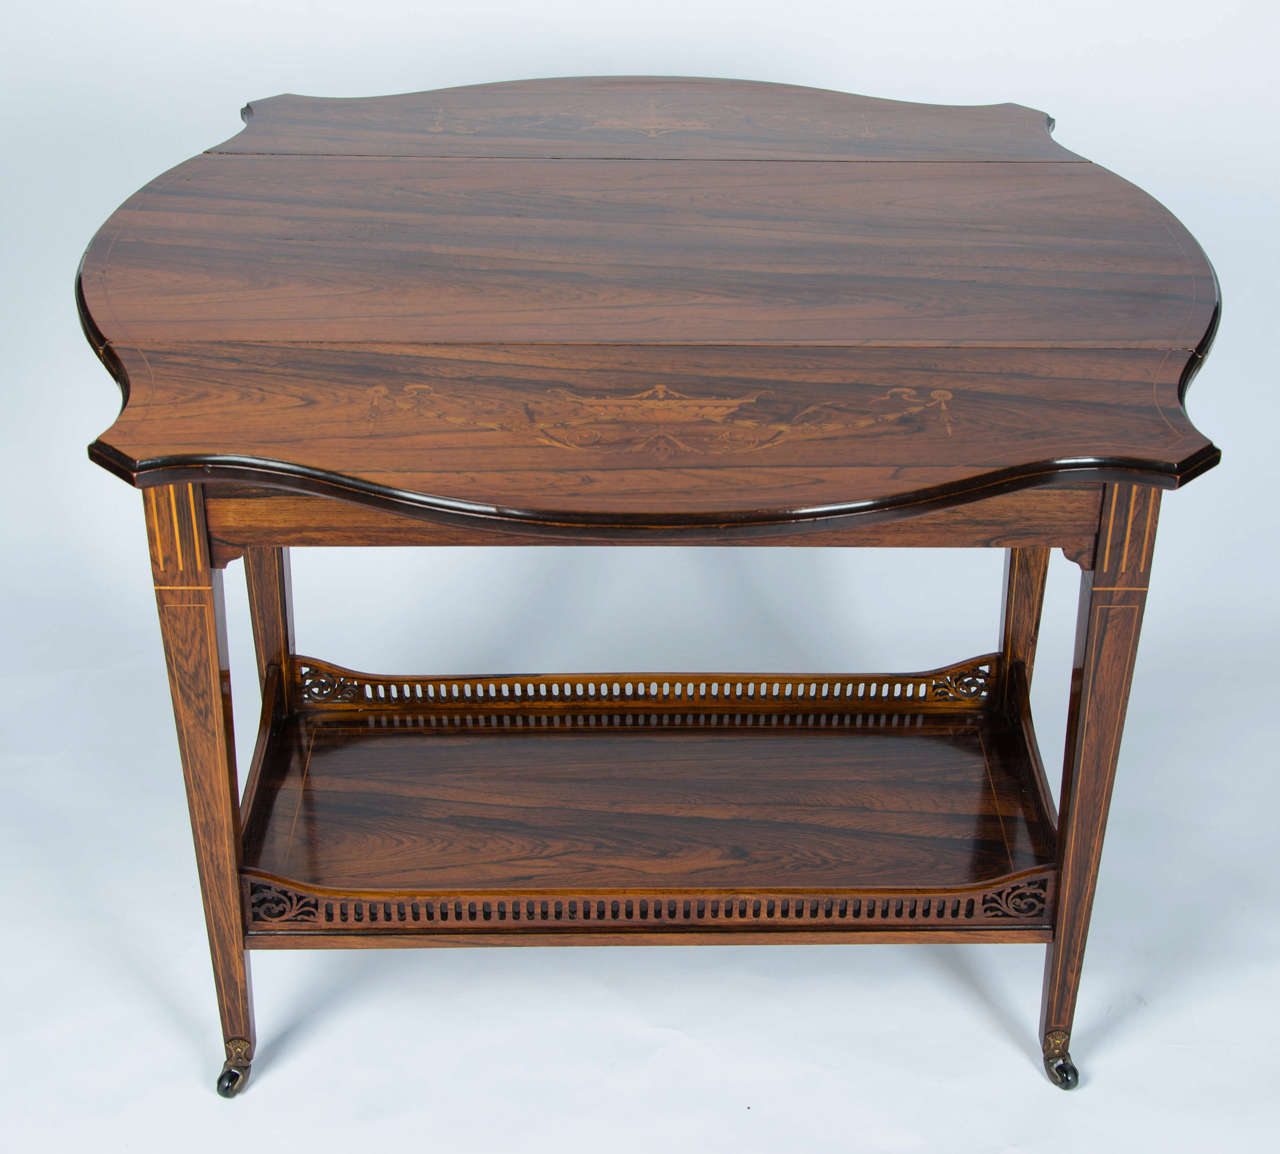 A fine example of an Edwardian marquetry drop-leaf table with two end drawers and galleried lower tier.